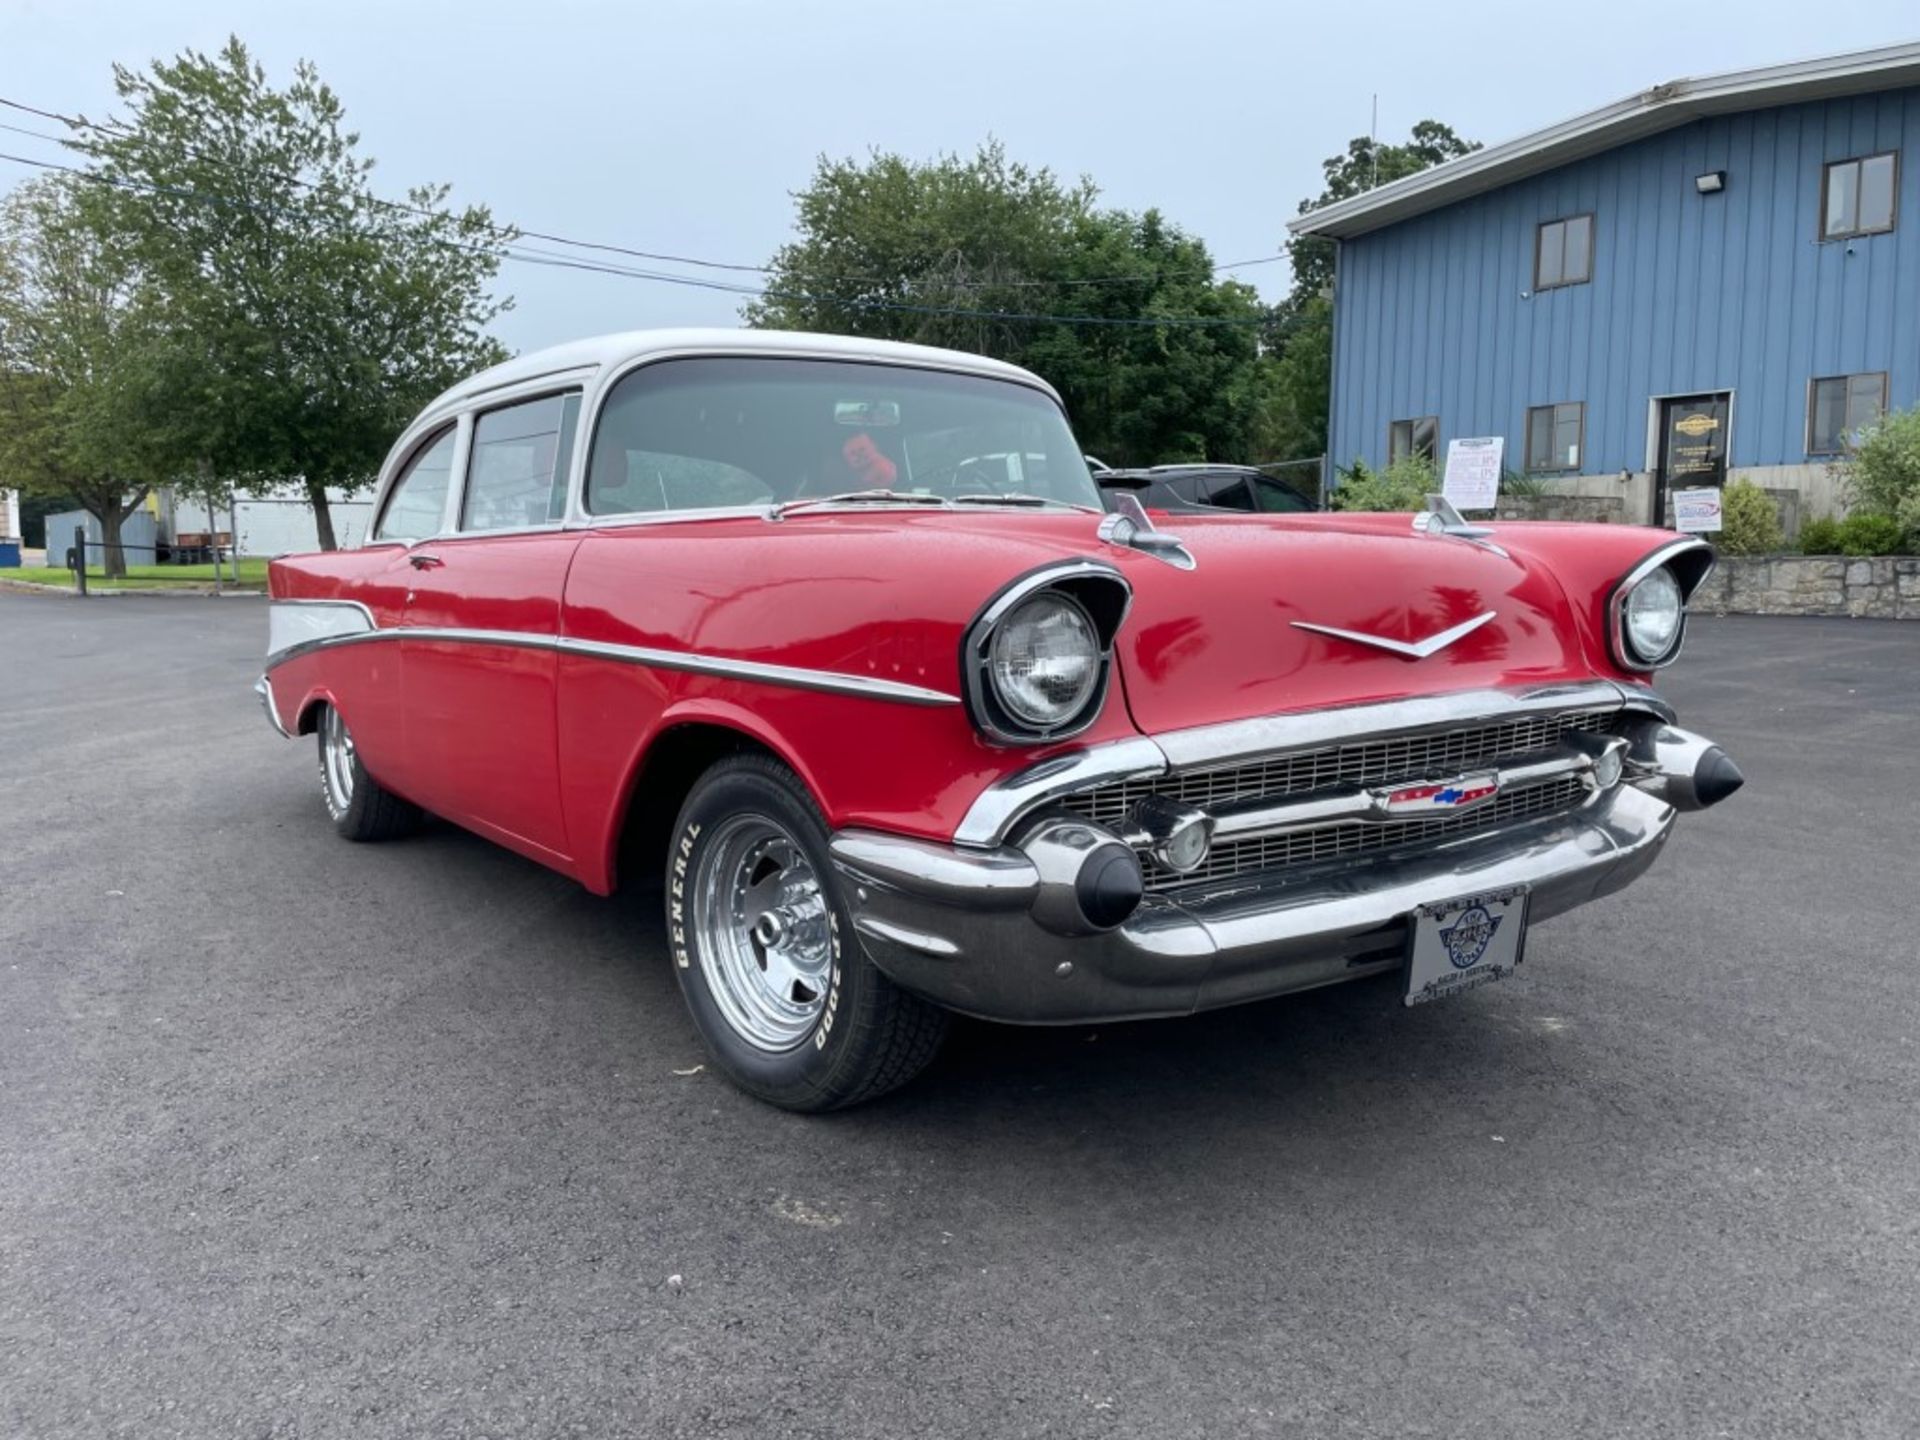 1957 Chevy 210 - Image 10 of 13